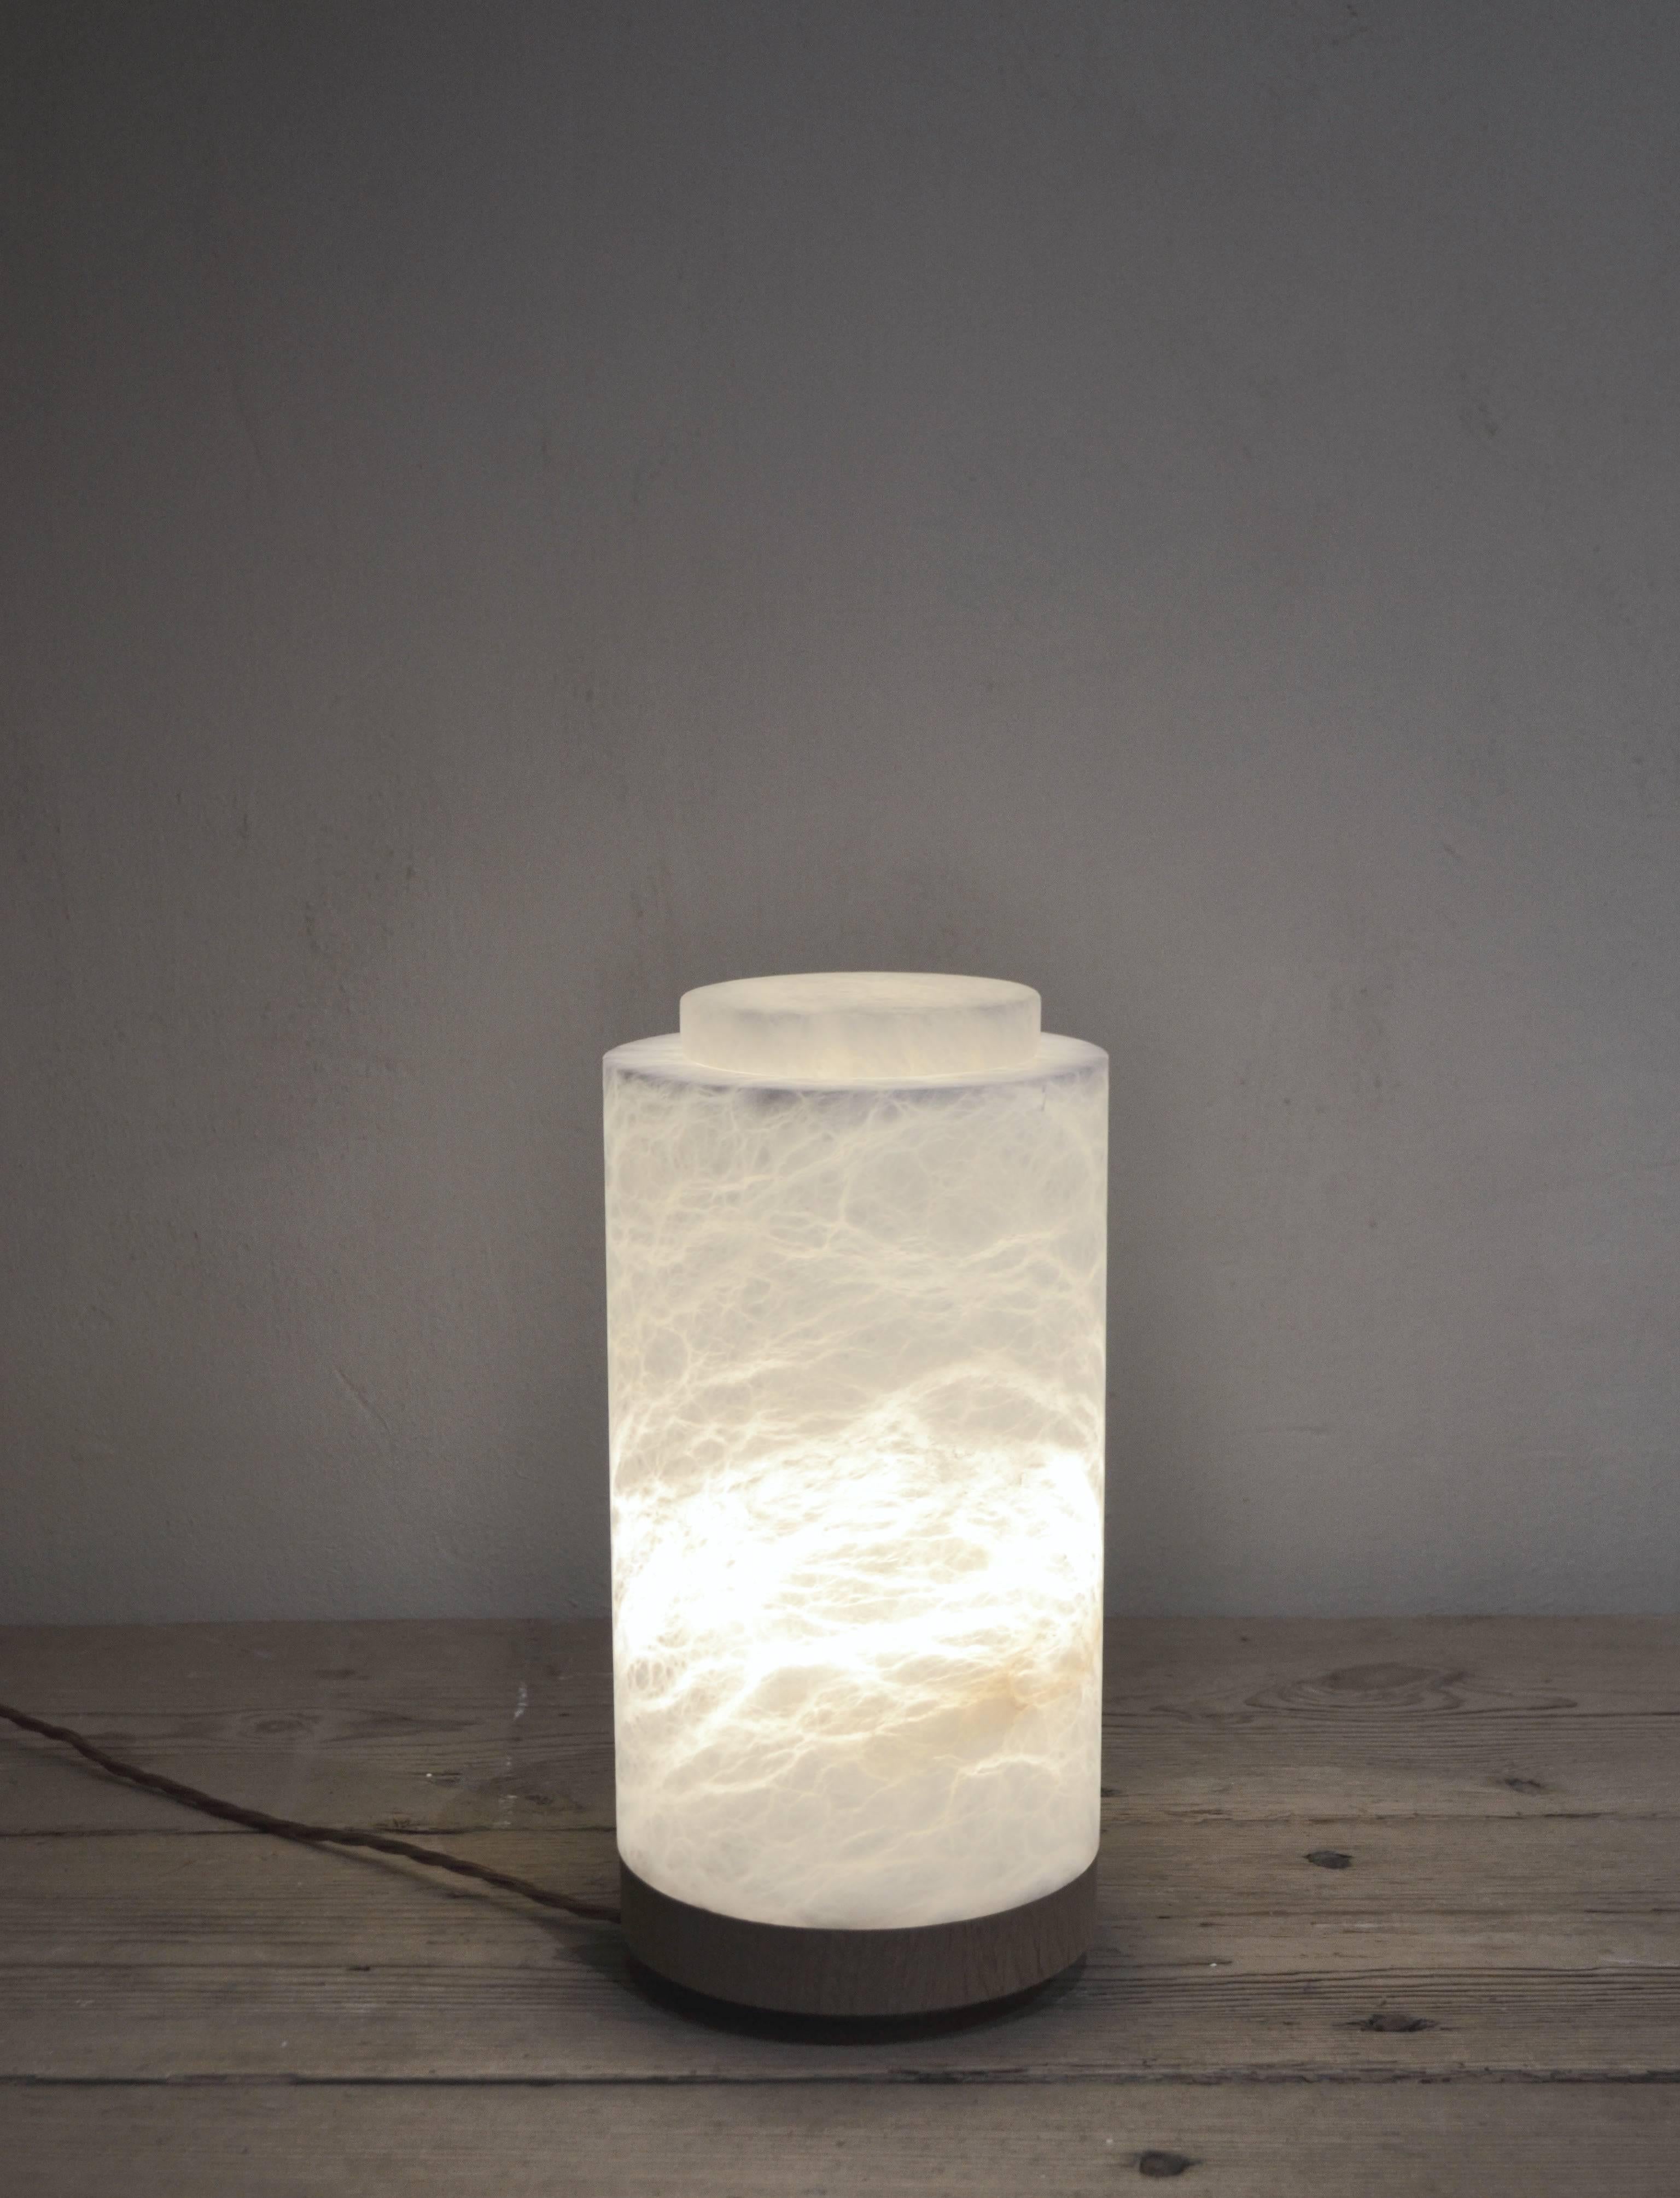 Alabaster lamp from Michaël Verheyden with removable alabaster top, base in natural solid oak. Old school plug, switch and twisted cable. The lamp has a warm and soft glow.